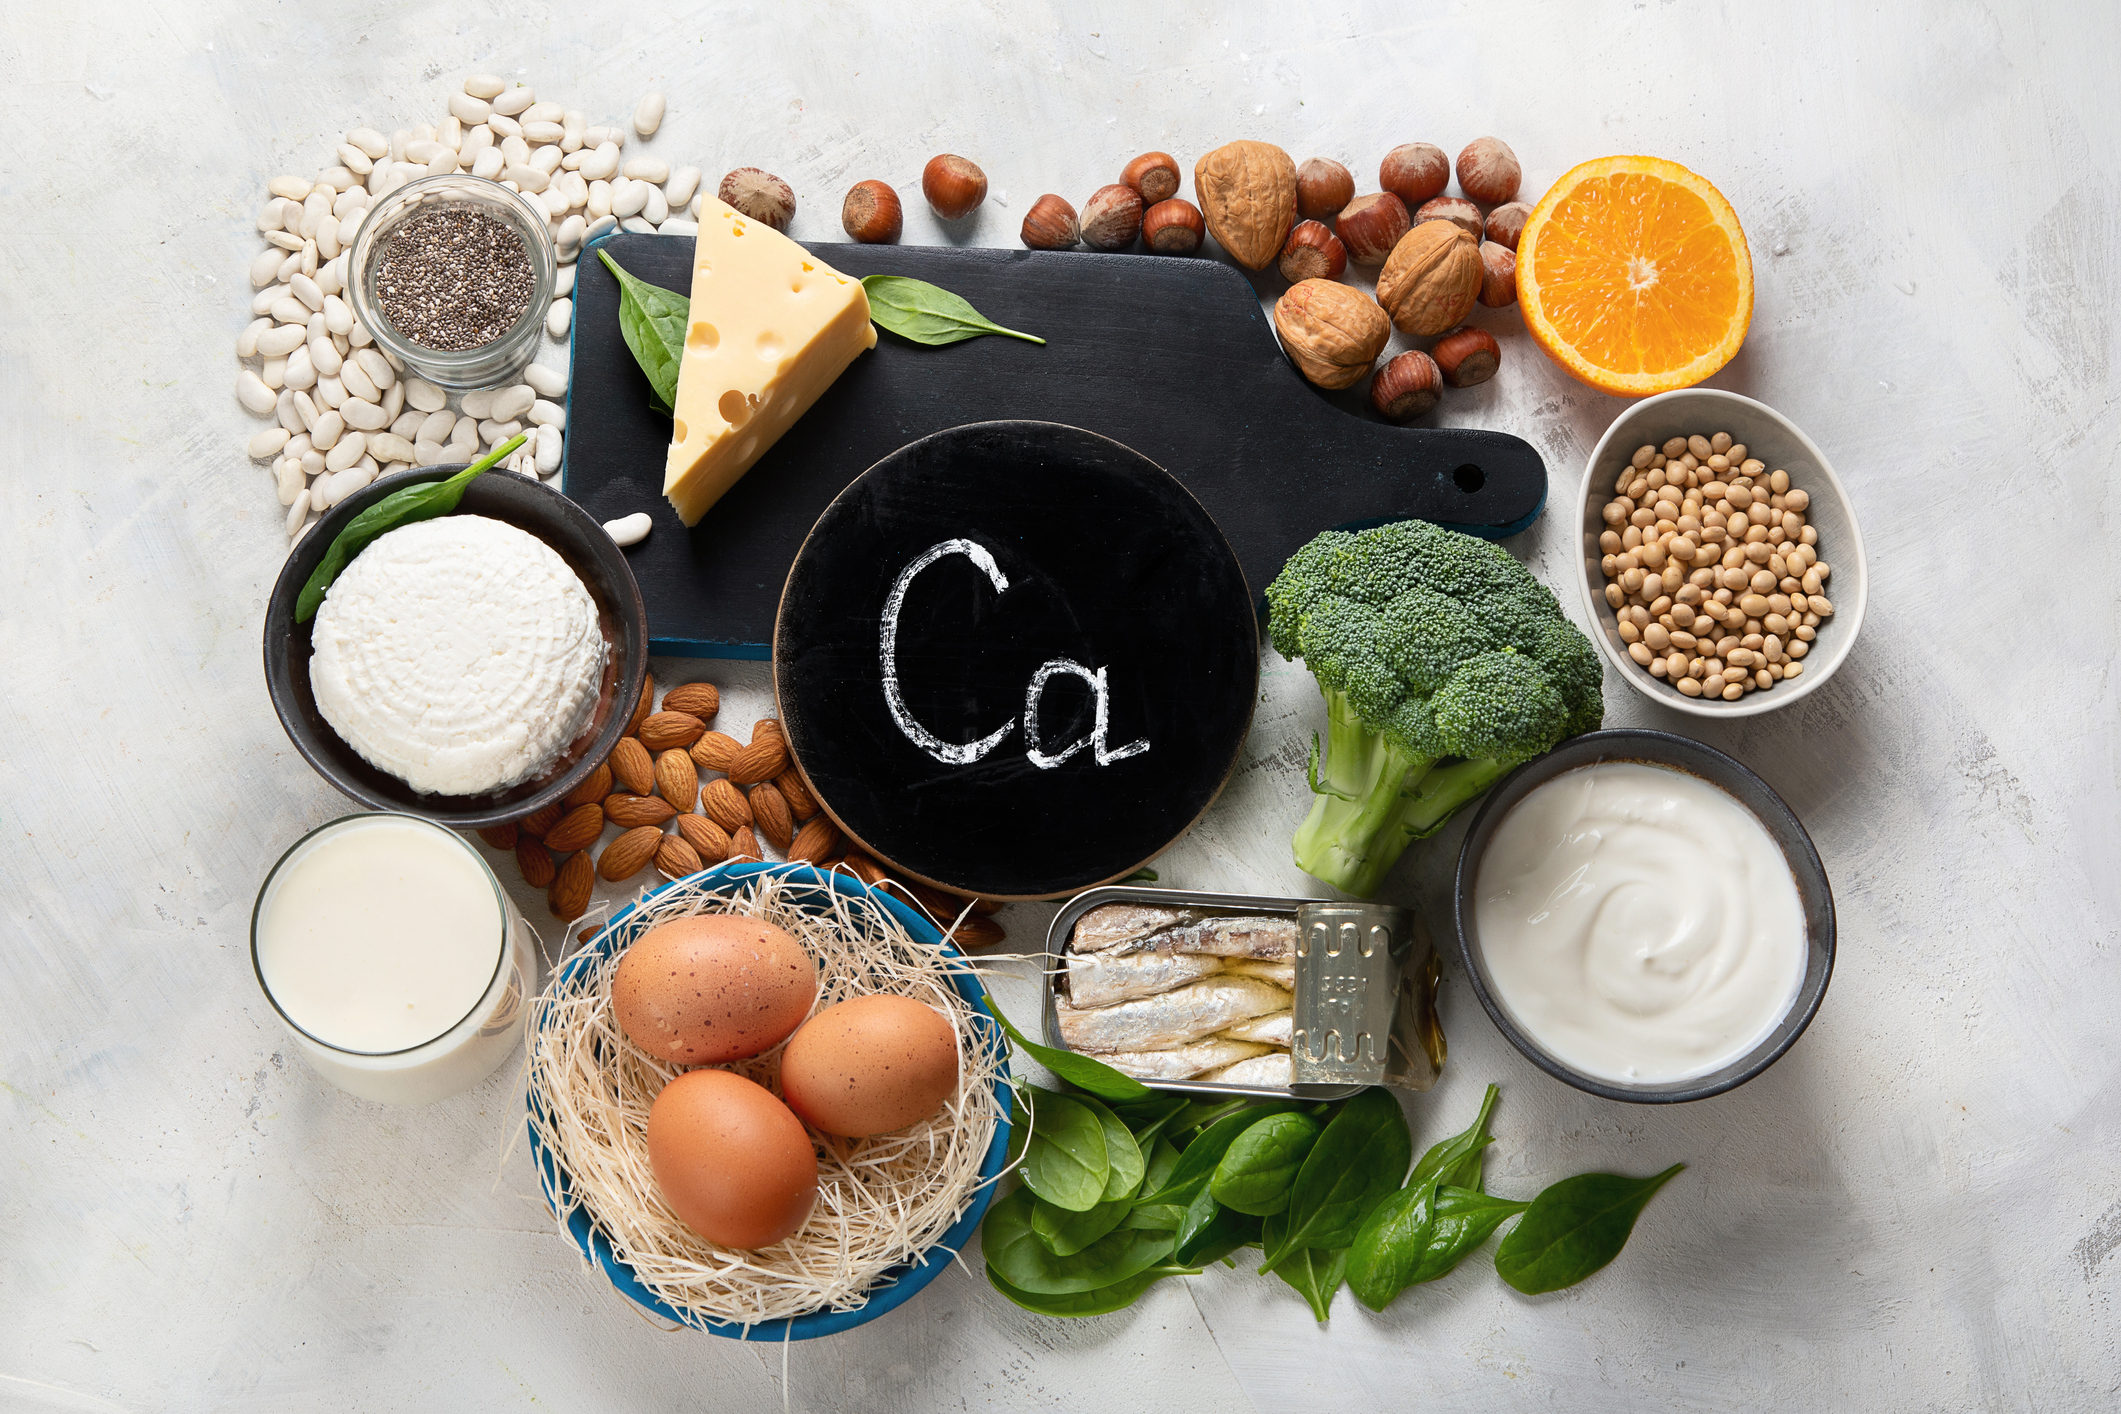 Foods high in calcium such as cheese and broccoli.